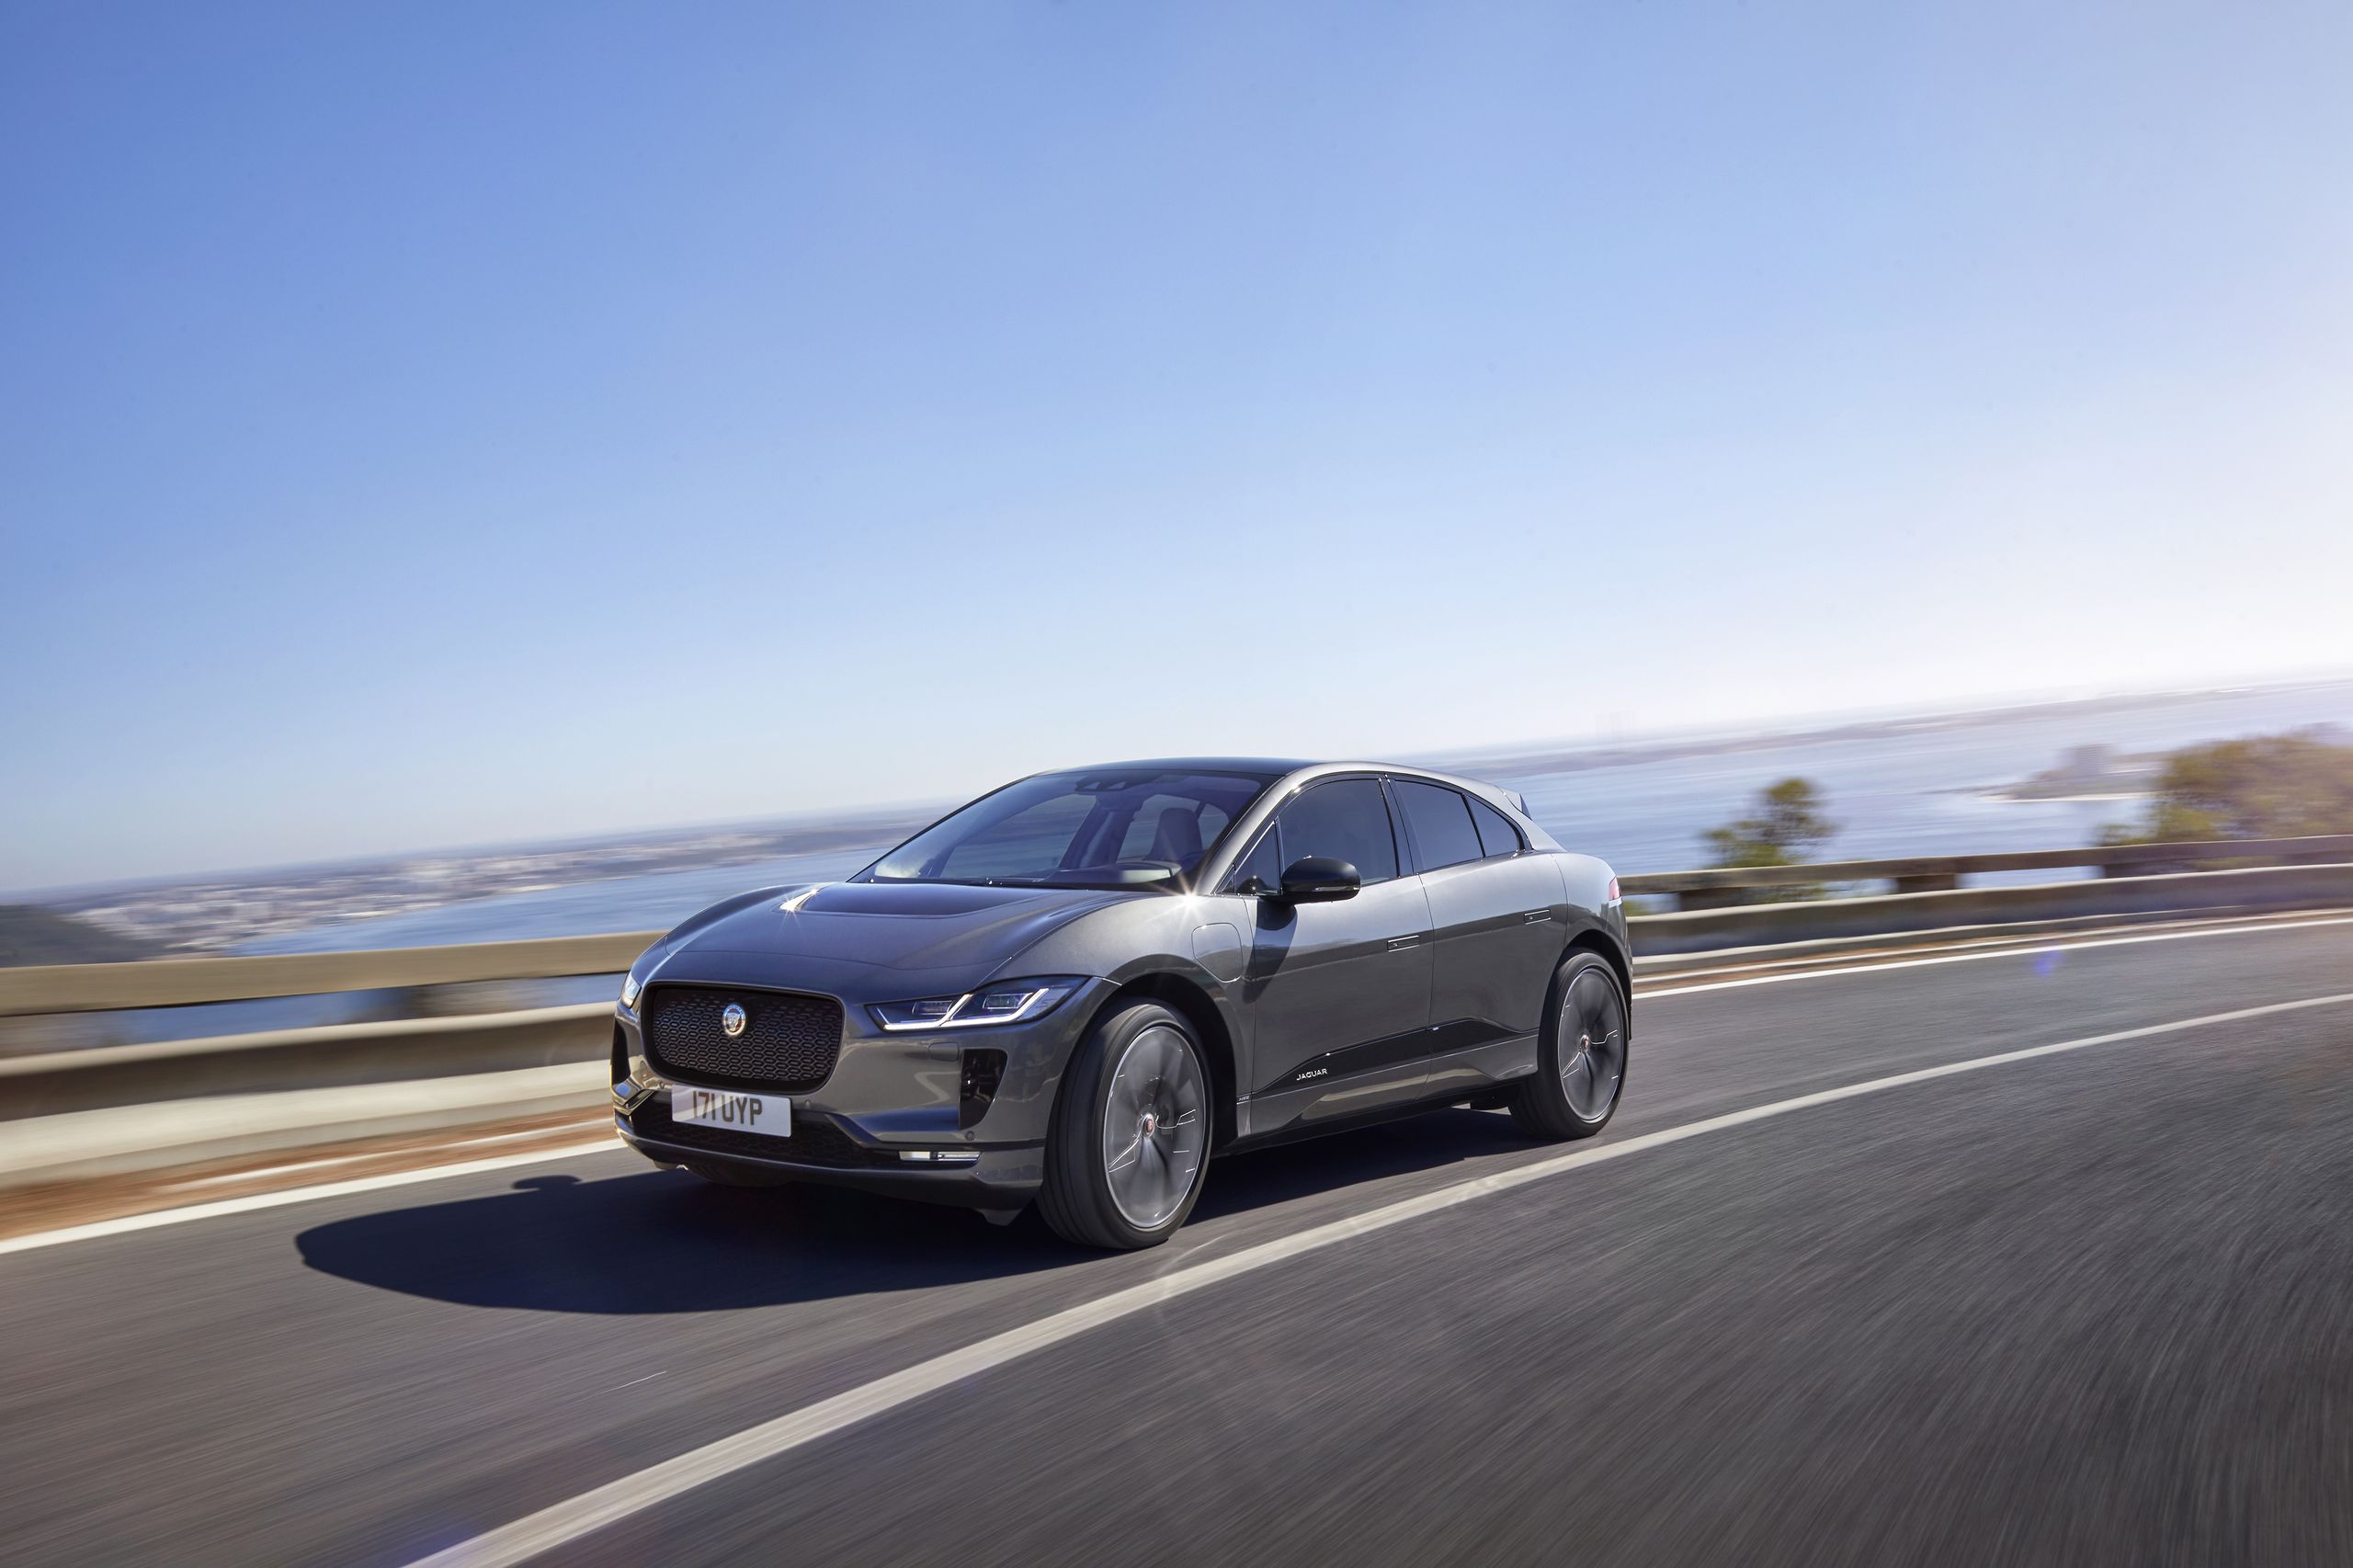 Wallpaper Wednesday Jaguar I Pace Our Top Image